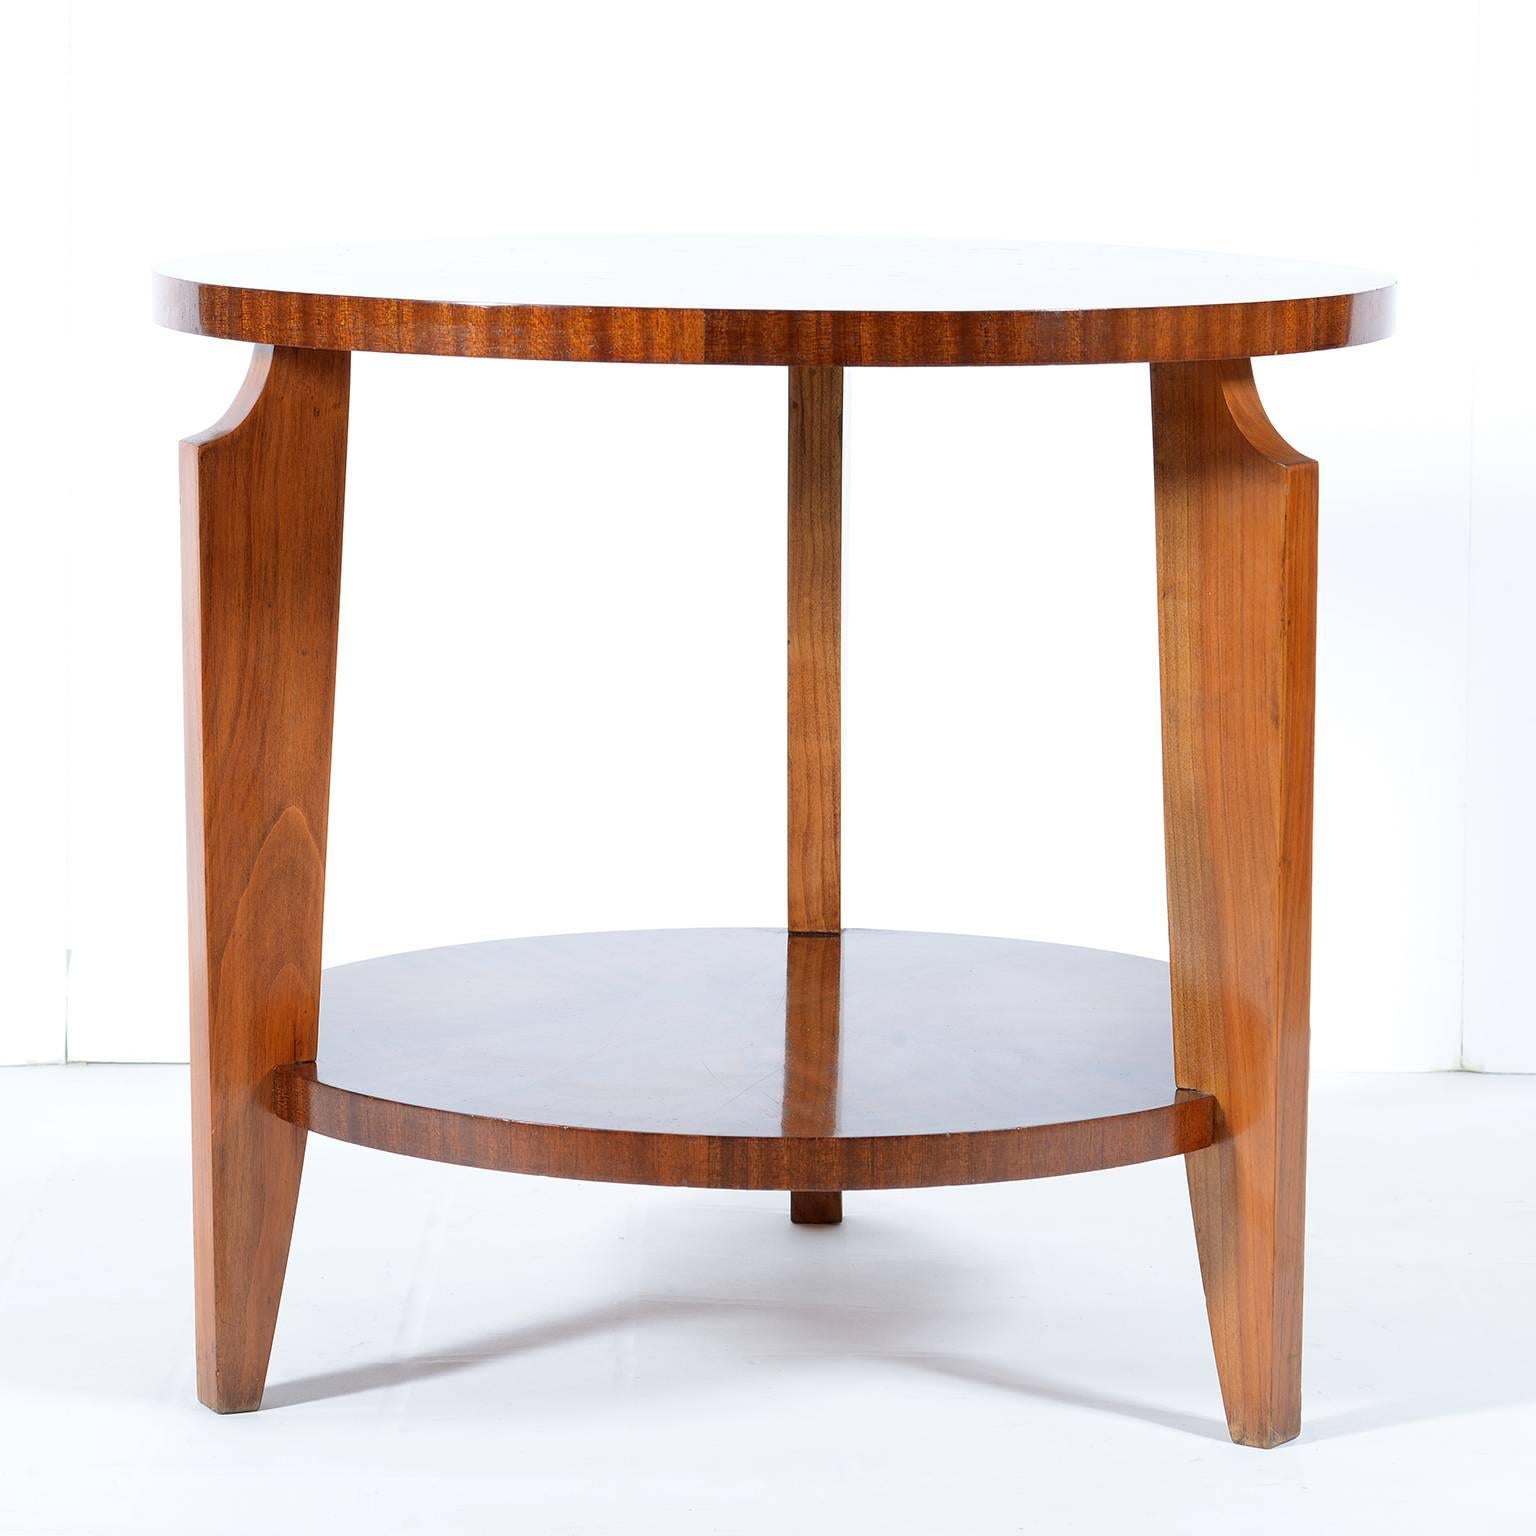 Three elegant solid cheerywood legs and double round top side table or occasional table.
 